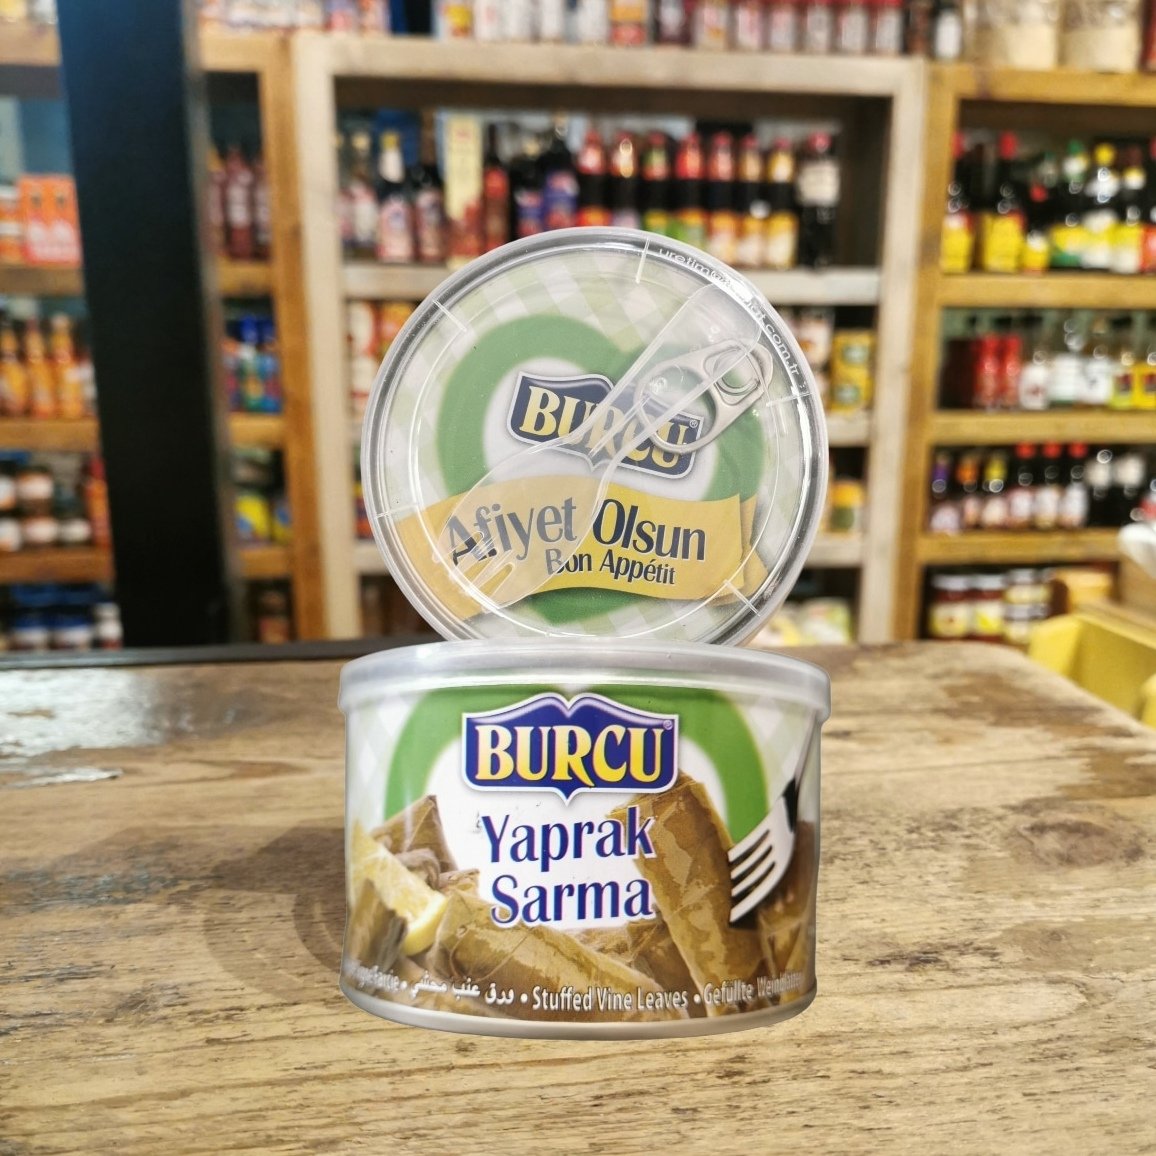 Burcu Stuffed Grape Leaves, also known as Yaprak Sarma, are ready-to-eat stuffed vine leaves. Ideal as an appetiser, a main dish, as part of an antipasti platter or simply as a wonderful impromptu snack! (comes with a fork) Available @EnglishMarket & mrbells.ie